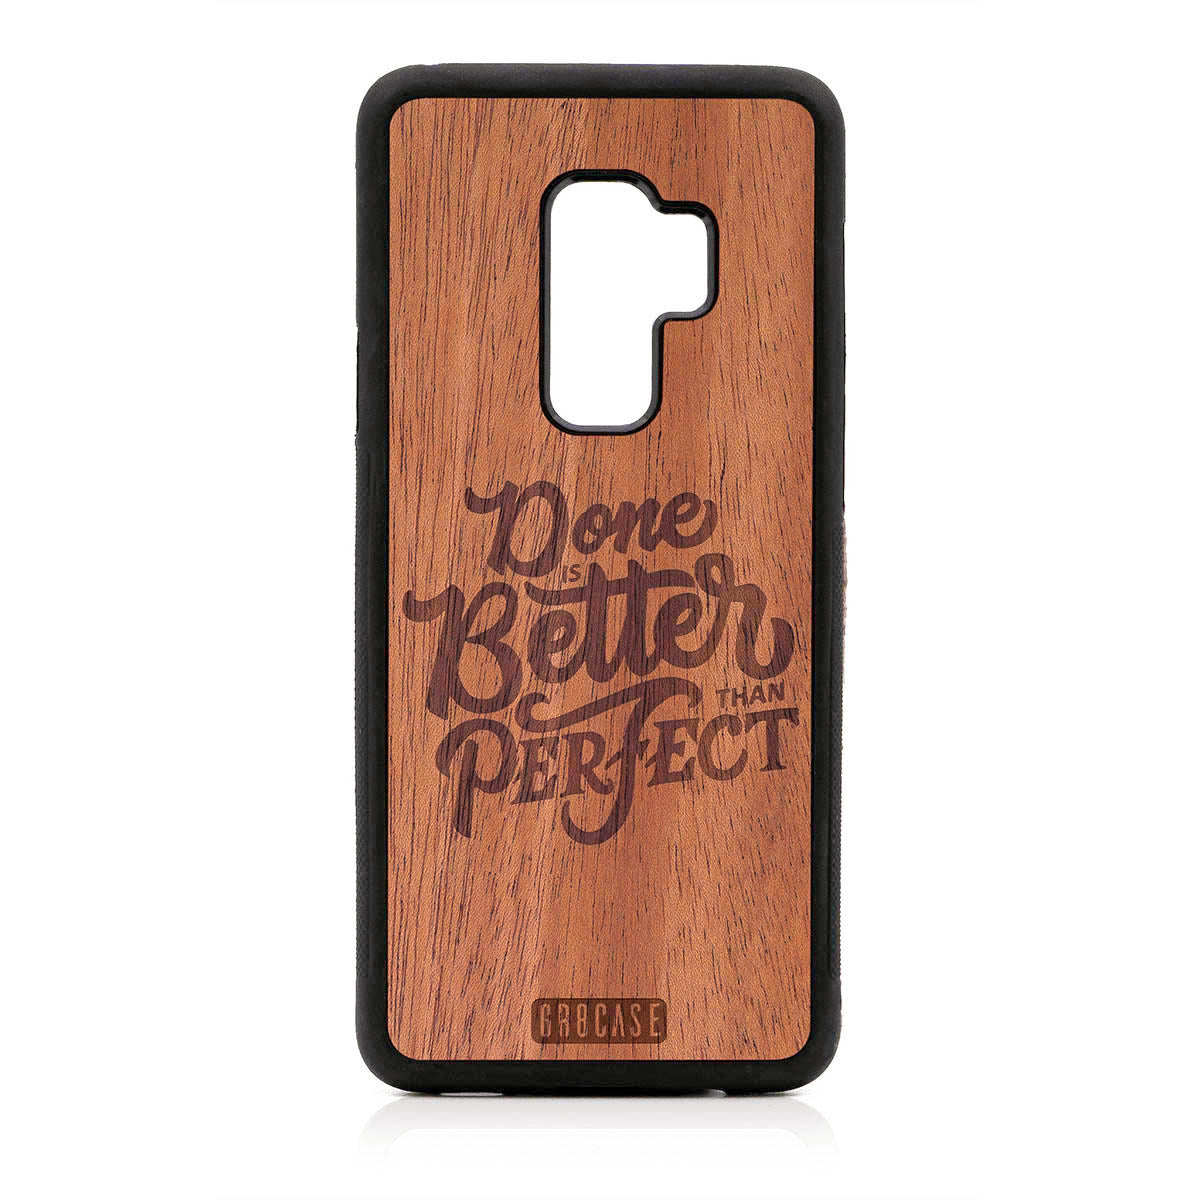 Done Is Better Than Perfect Design Wood Case For Samsung Galaxy S9 Plus by GR8CASE